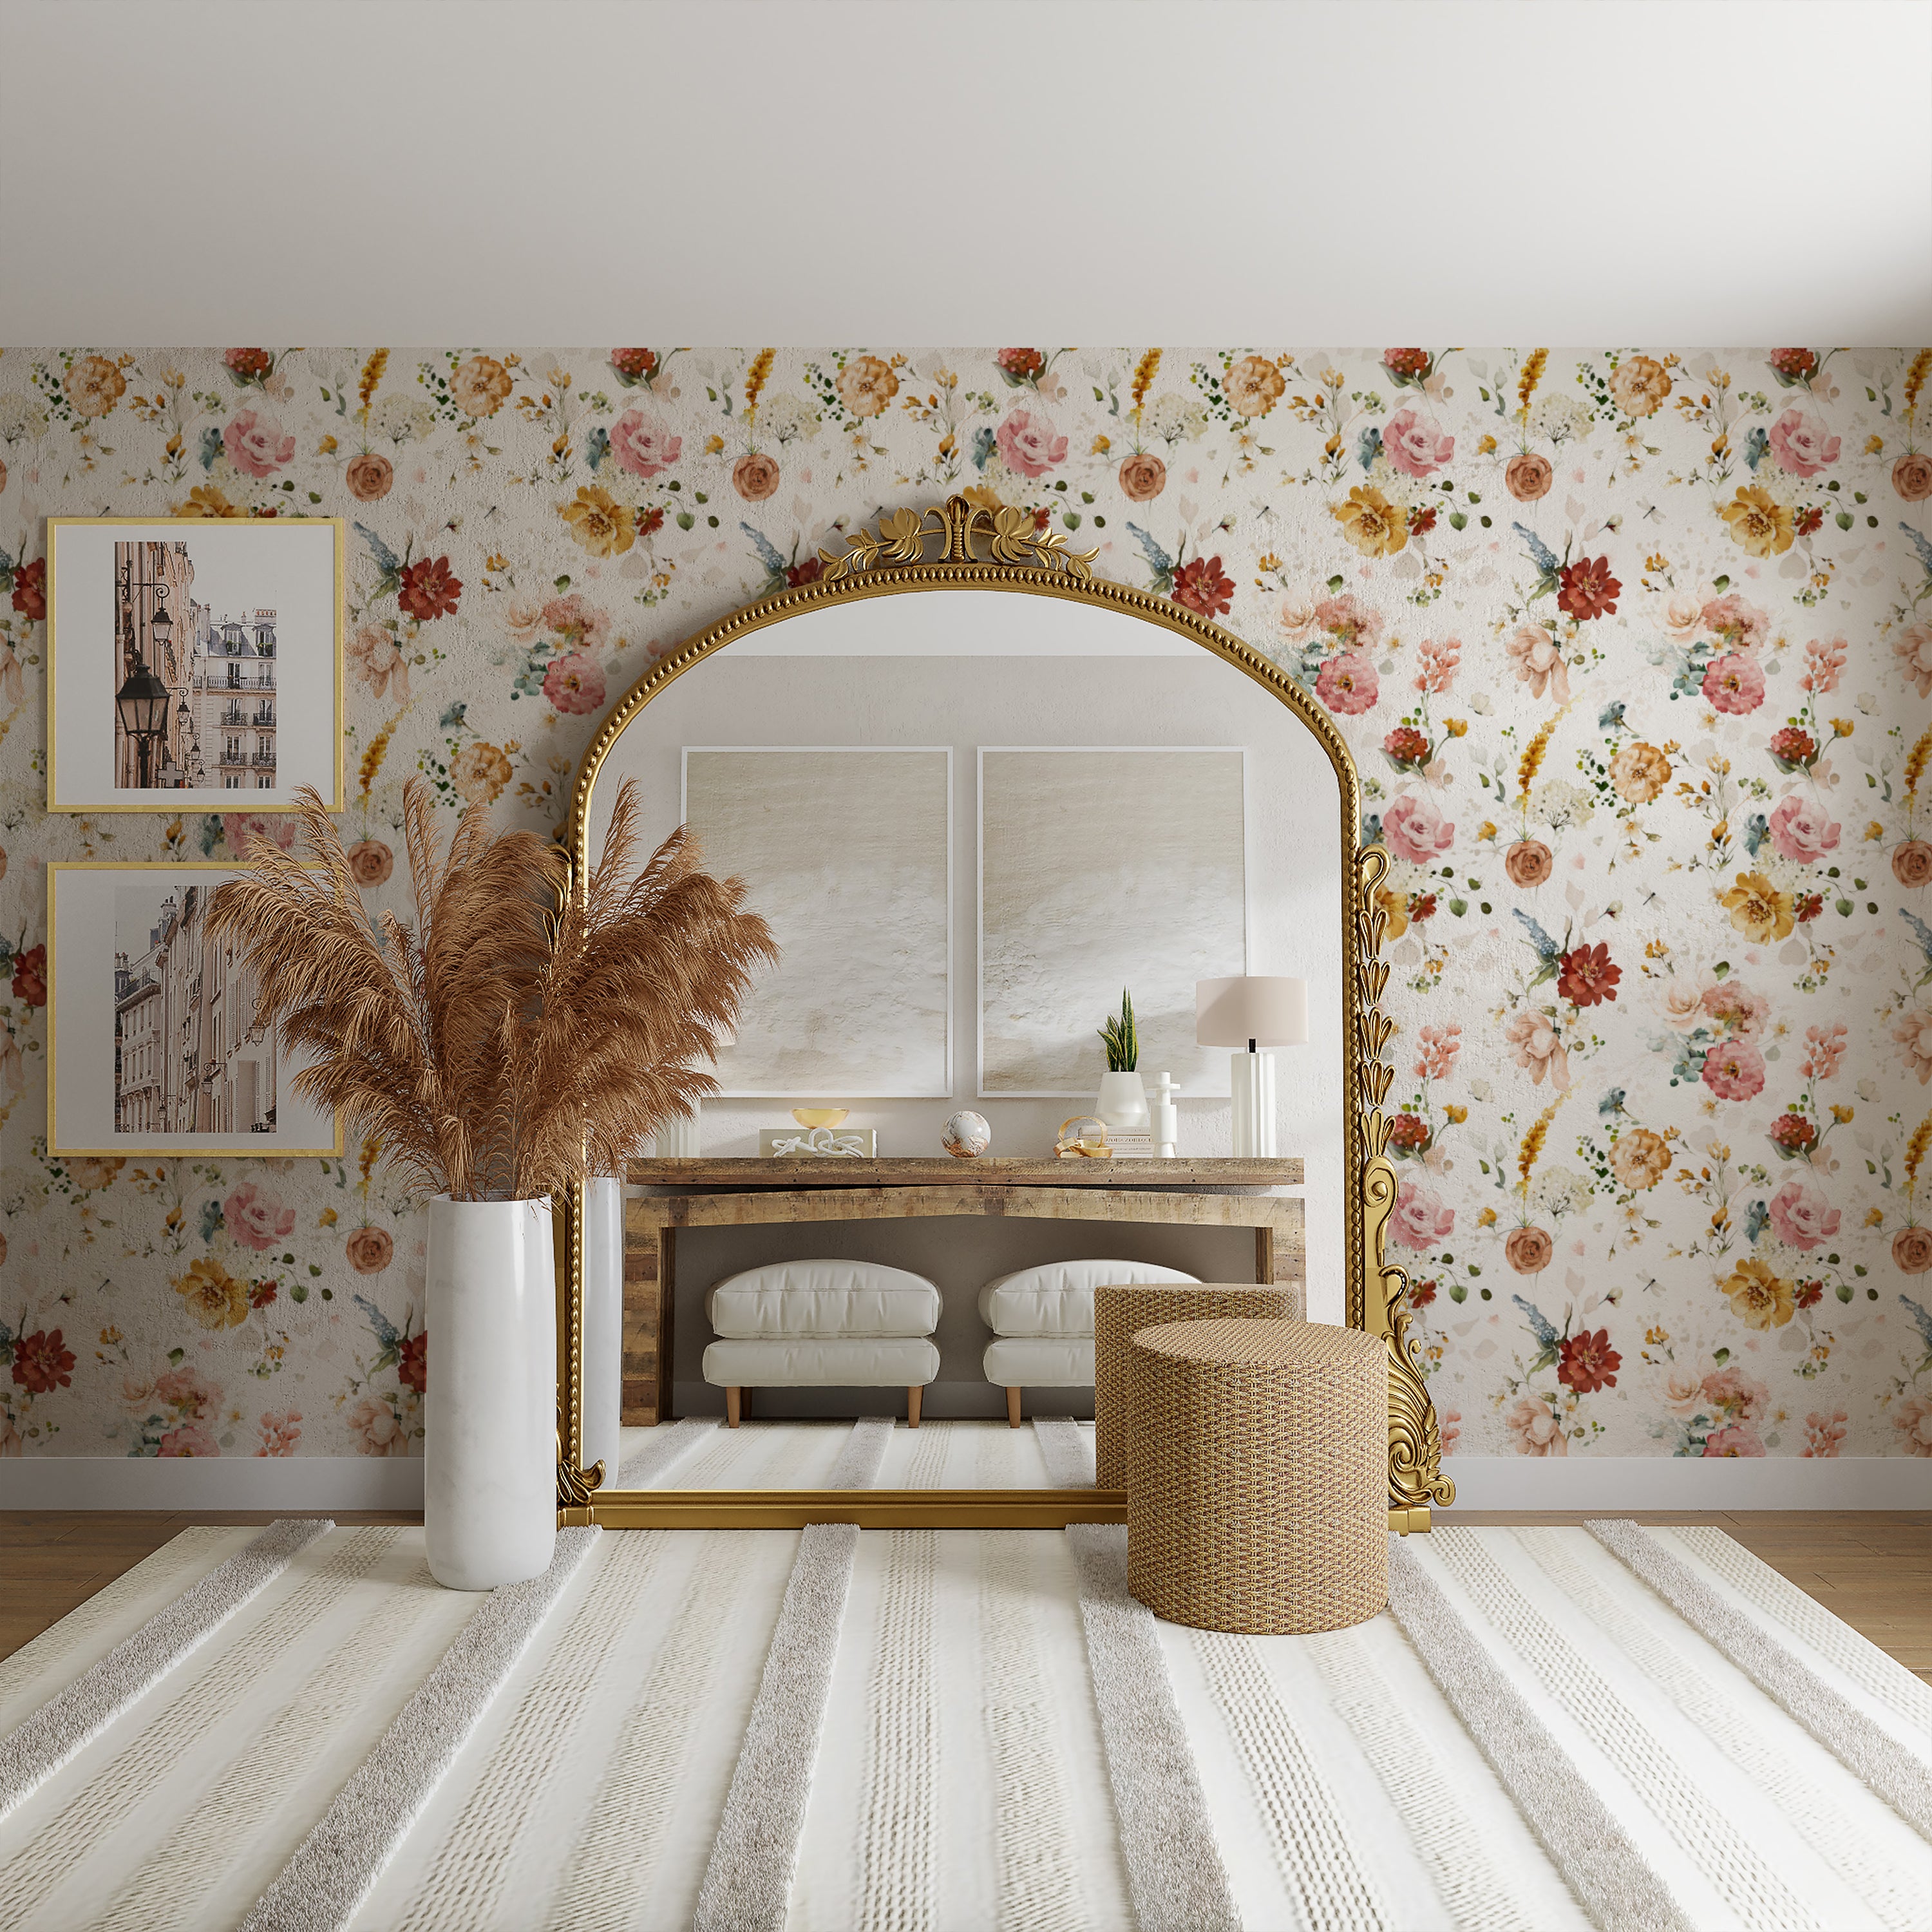 A stylish room interior with a large arched mirror framed in gold. The wall behind is adorned with Garden Flower Wallpaper III featuring a vibrant pattern of assorted colorful flowers on a light background. In front of the mirror is a modern console table with decorative items and a vase of pampas grass.